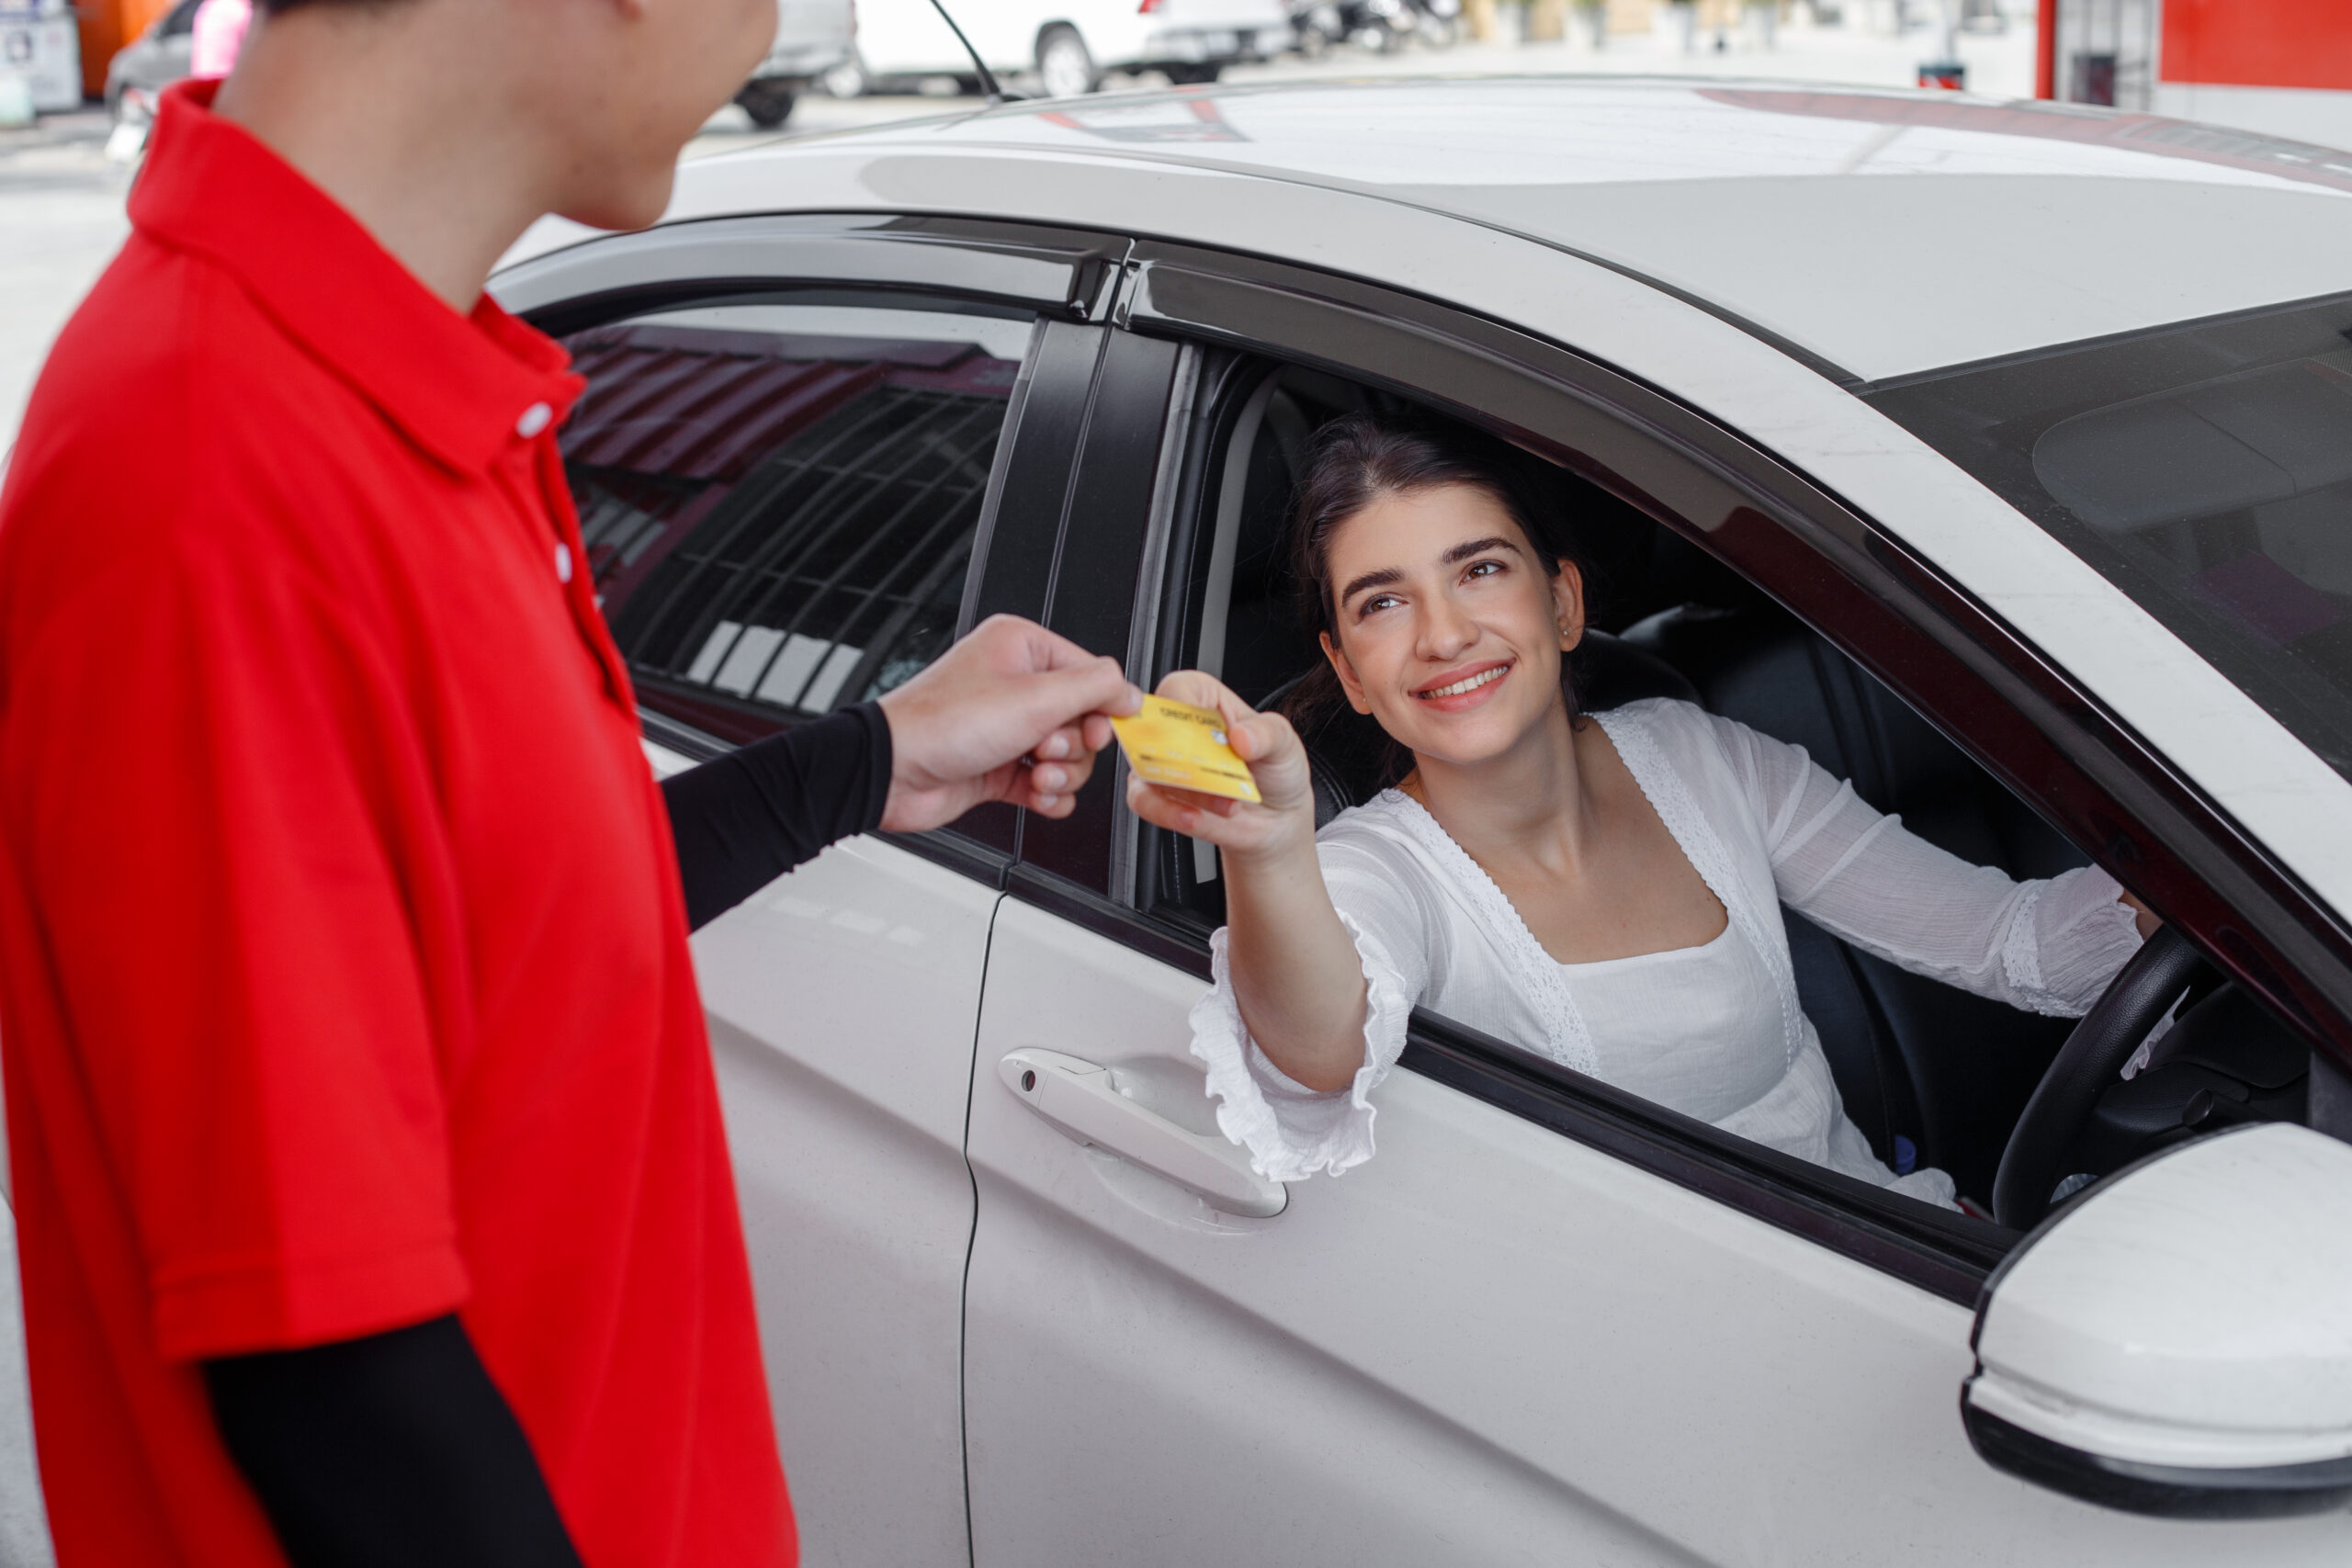 woman-in-car-paying-credit-card-after-refuel-car-2022-12-23-00-52-35-utc-scaled.jpg